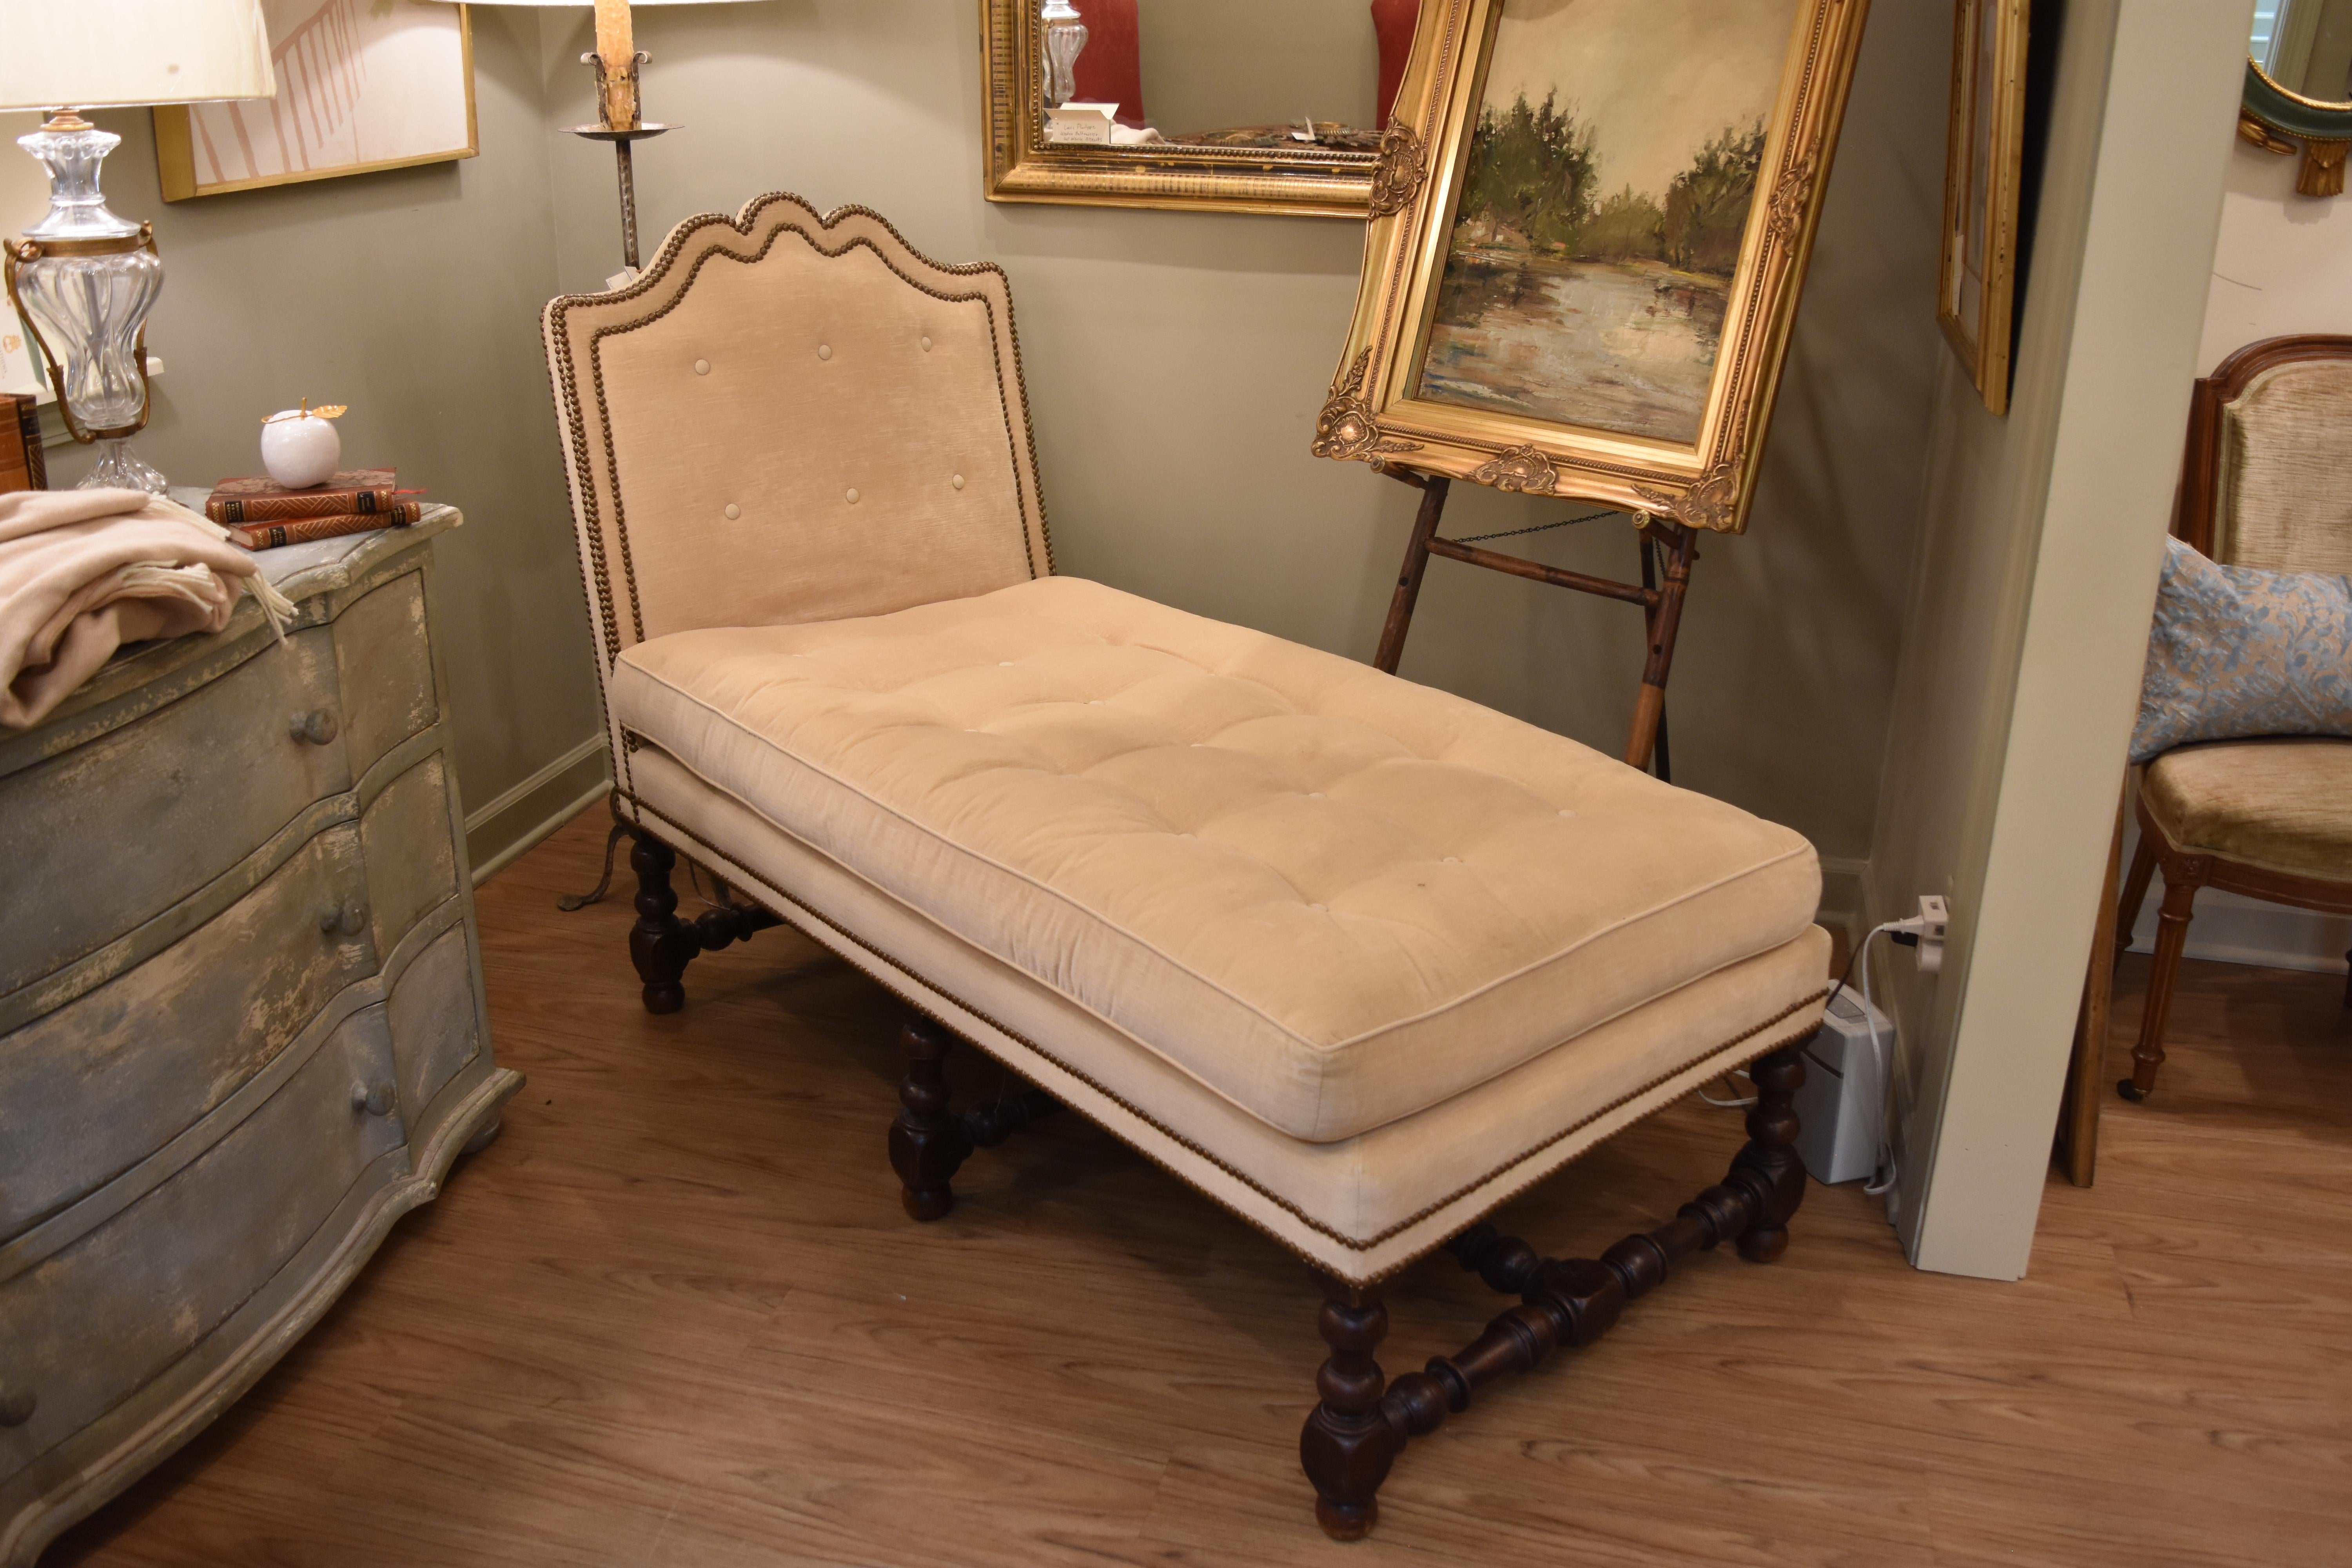 This 19th century French walnut chaises lounge features a cream velvet linen tufted upholstery with an interesting shaped back. The curved back is accentuated by nailheads. The stretcher forms an 